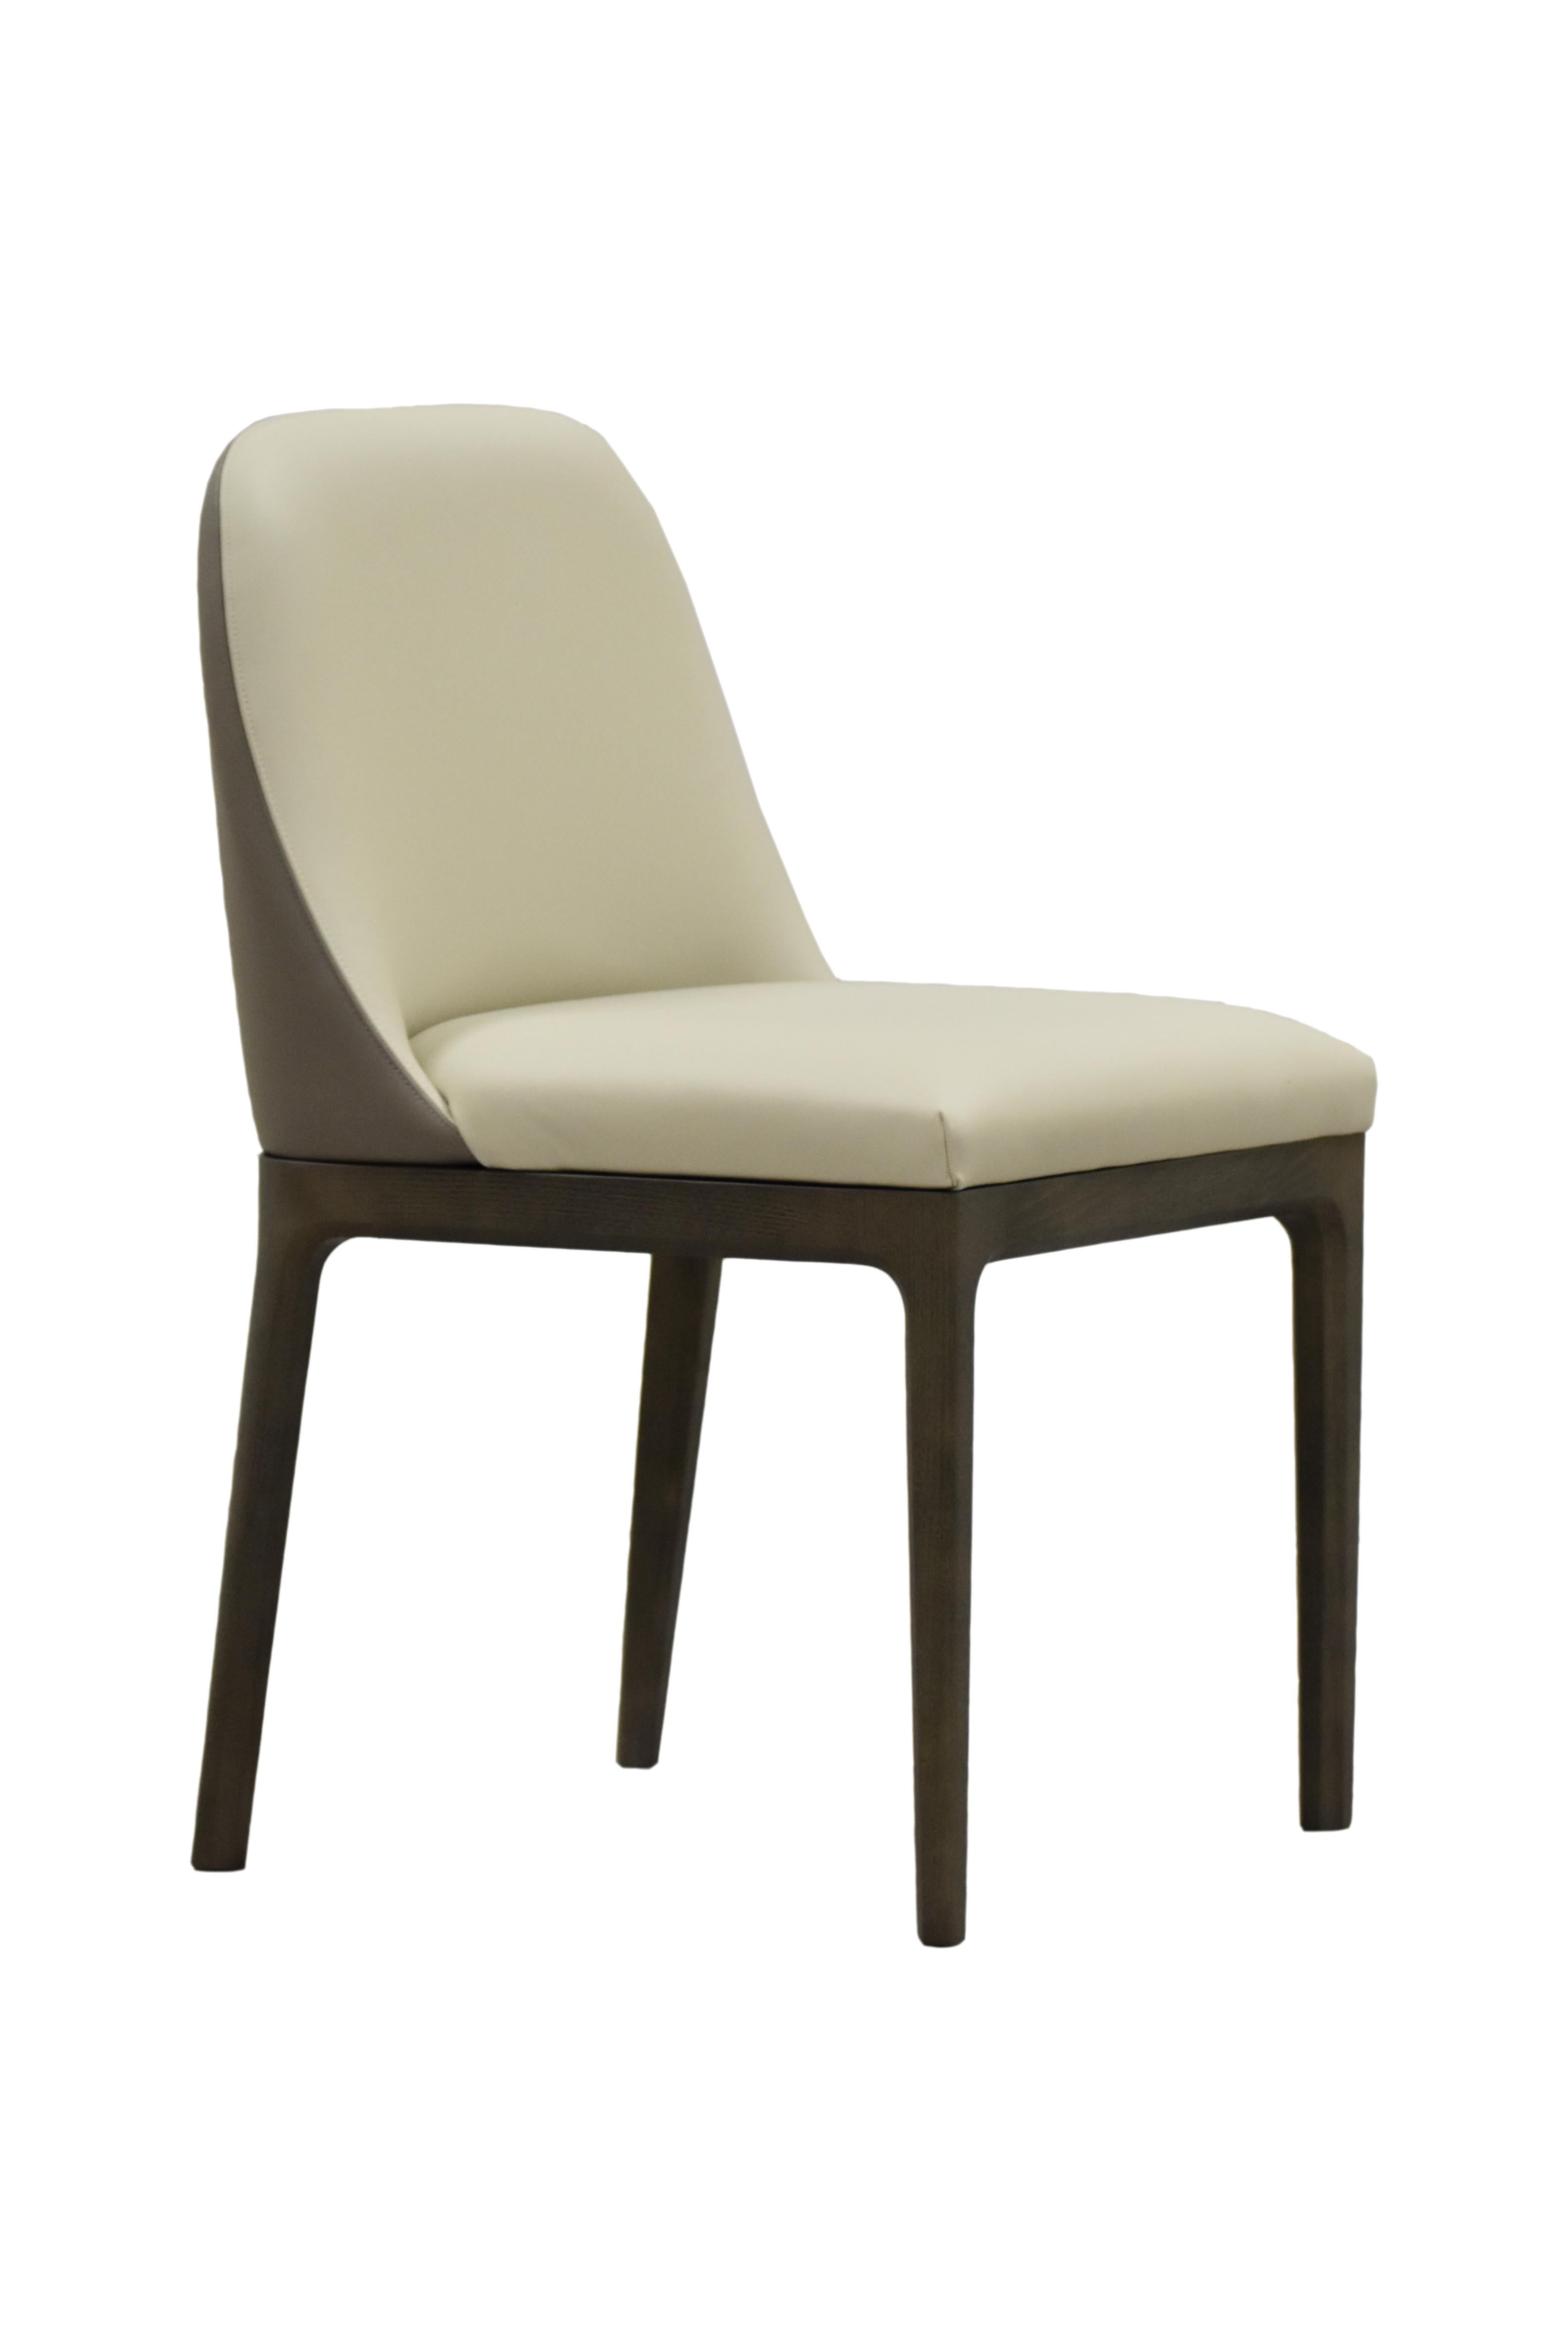 Bellagio Contemporary Upholsterd Dining Chair in Ashwood  2